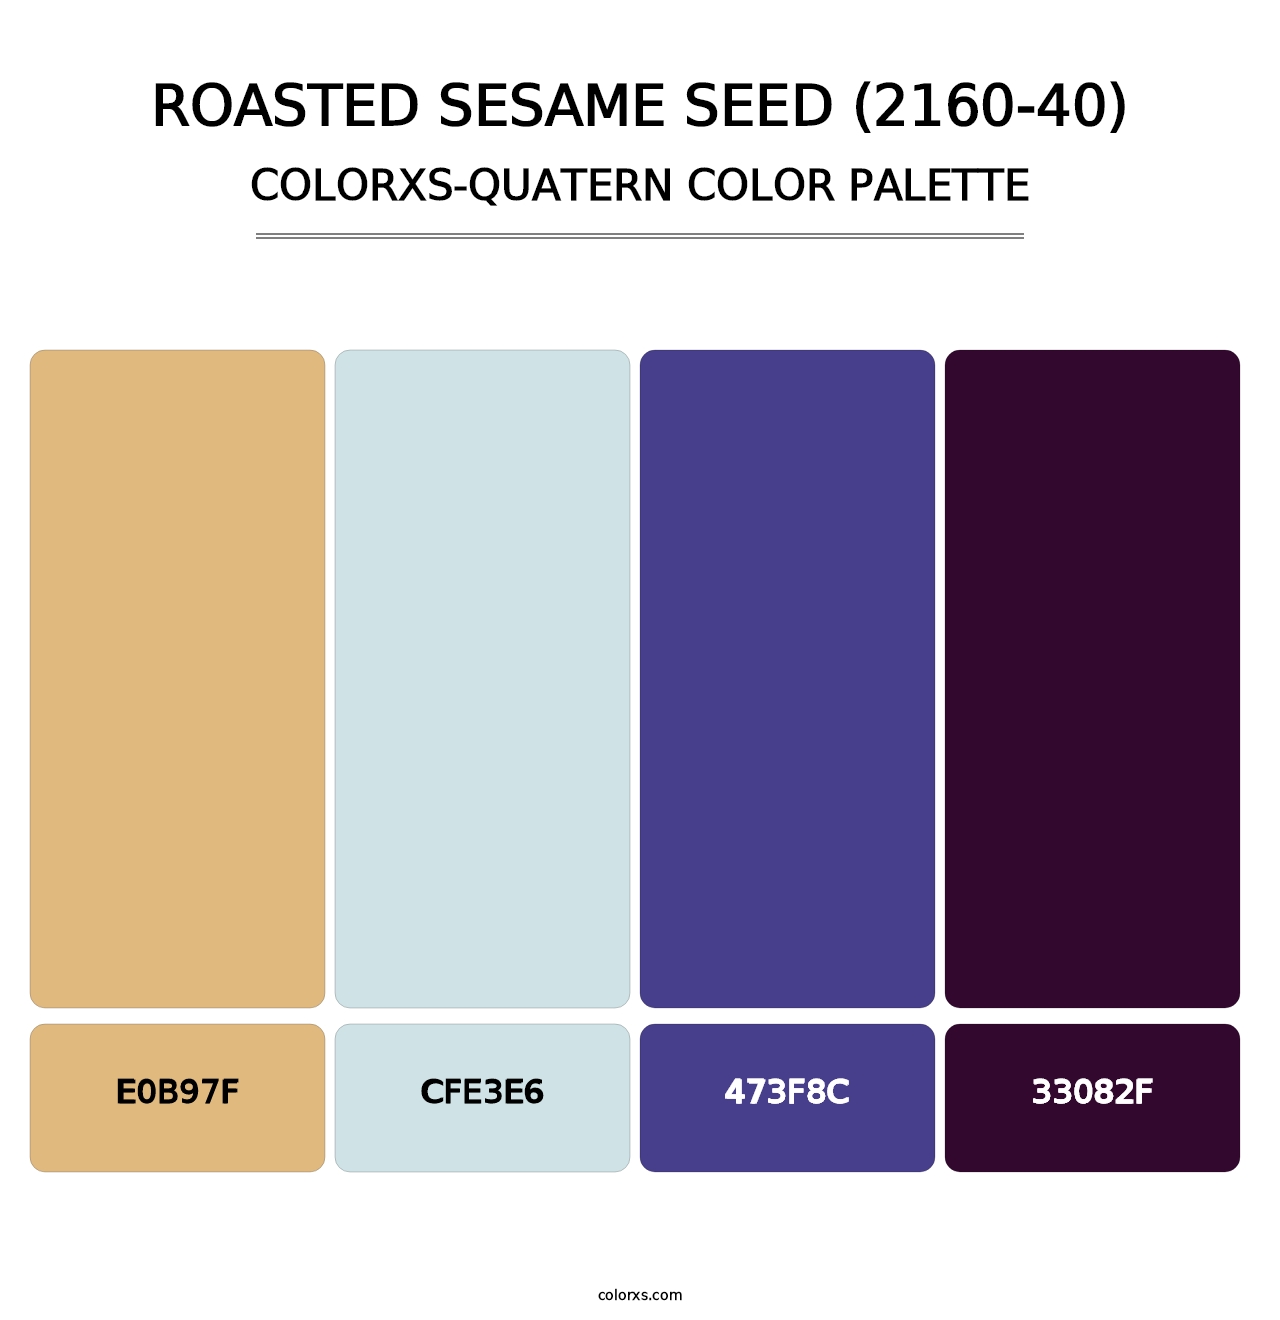 Roasted Sesame Seed (2160-40) - Colorxs Quatern Palette